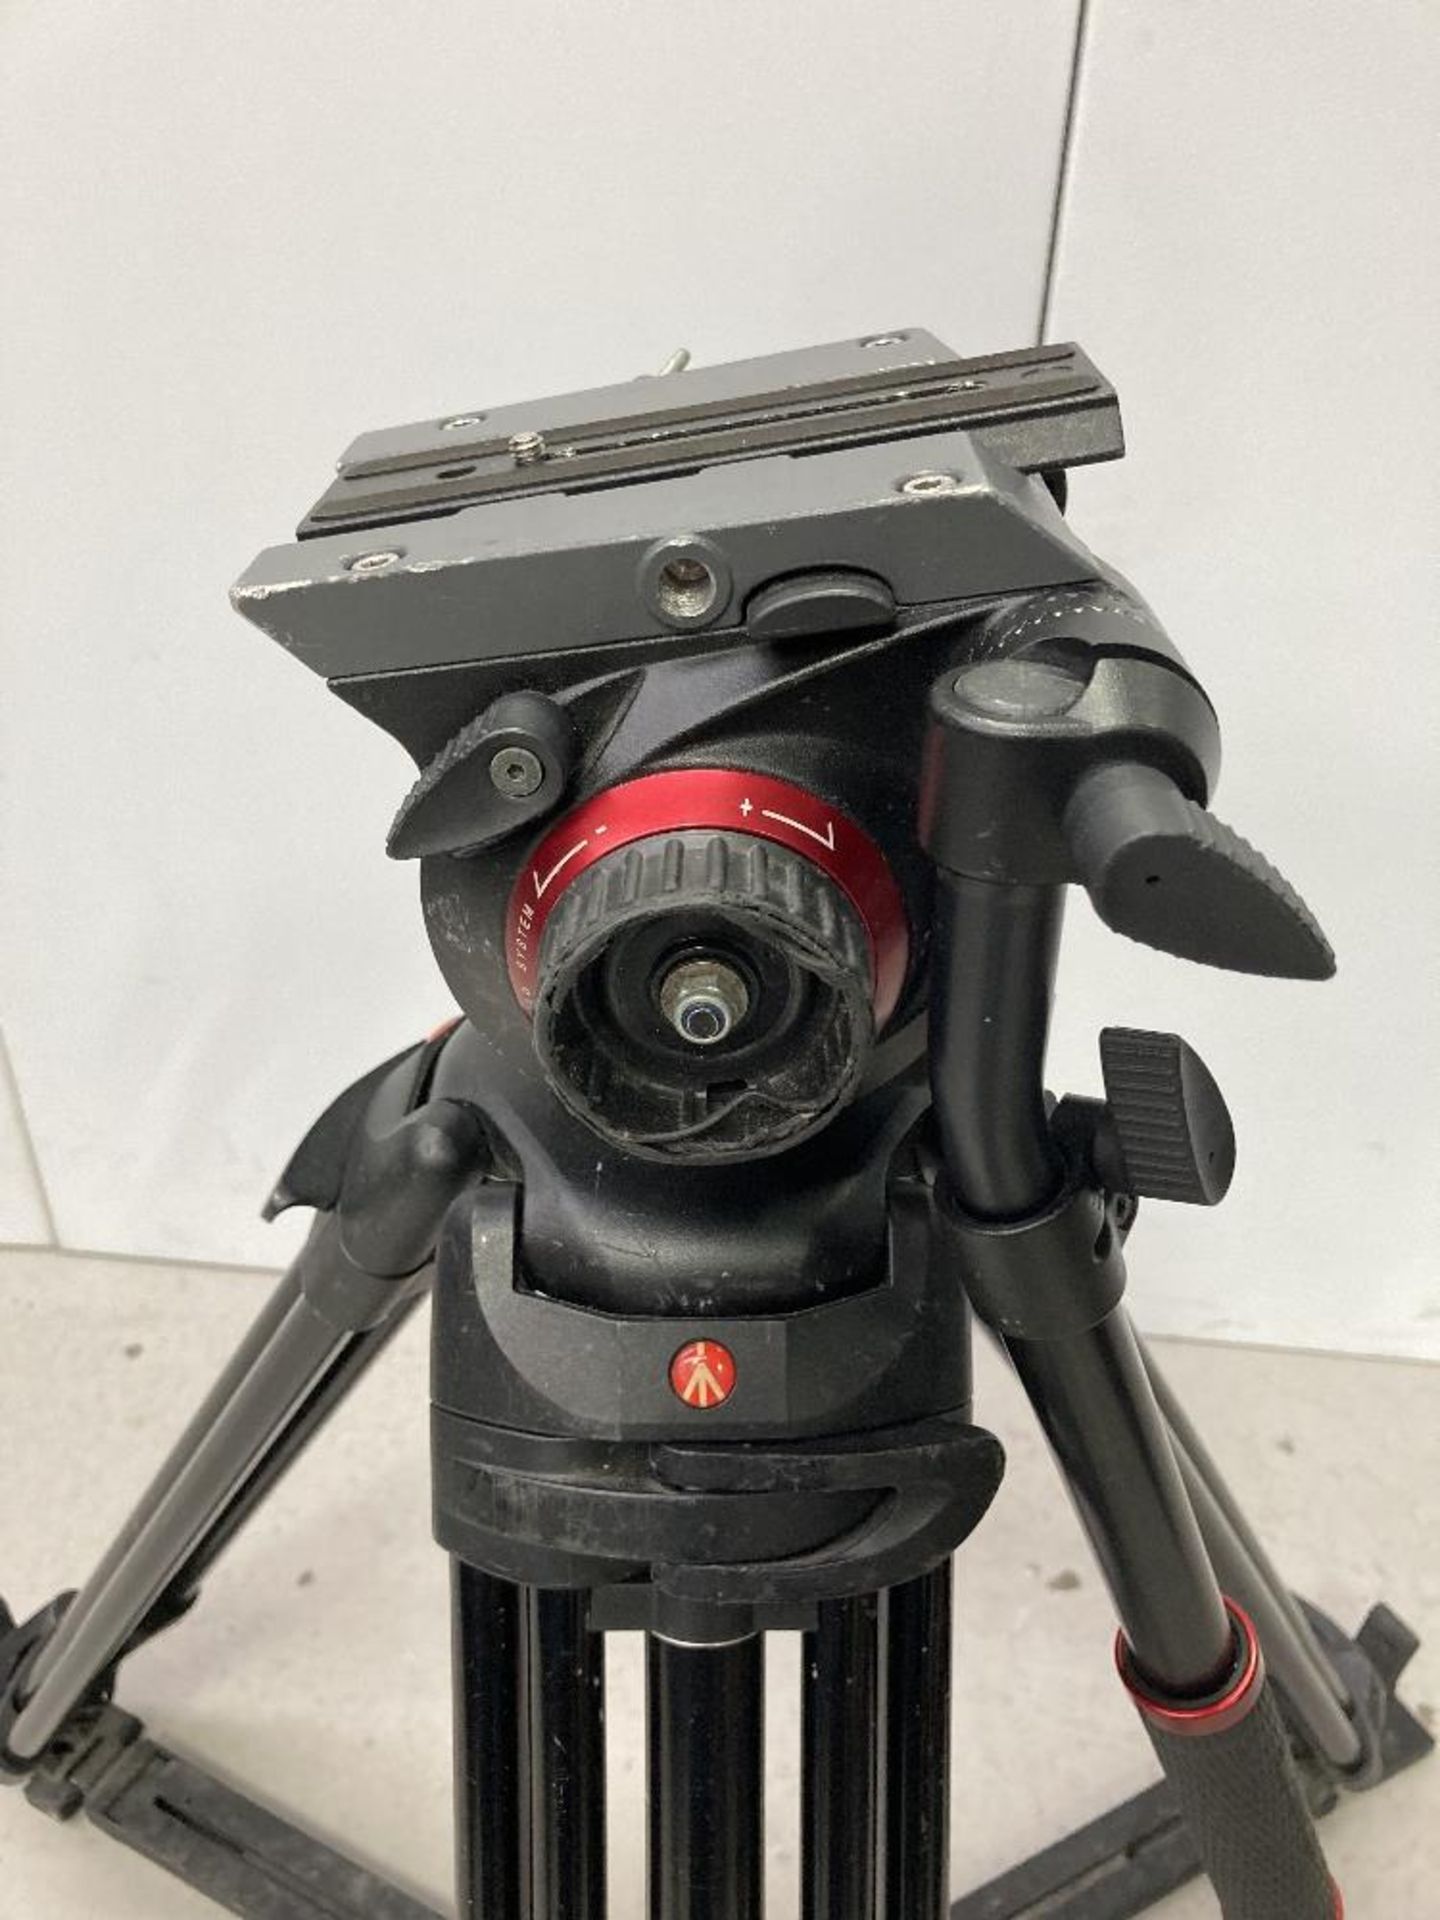 Manfrotto 504HD Tripod Head and 546GB Tripod with Carbon Fibre Legs with Manfrotto Carry Case - Image 3 of 6